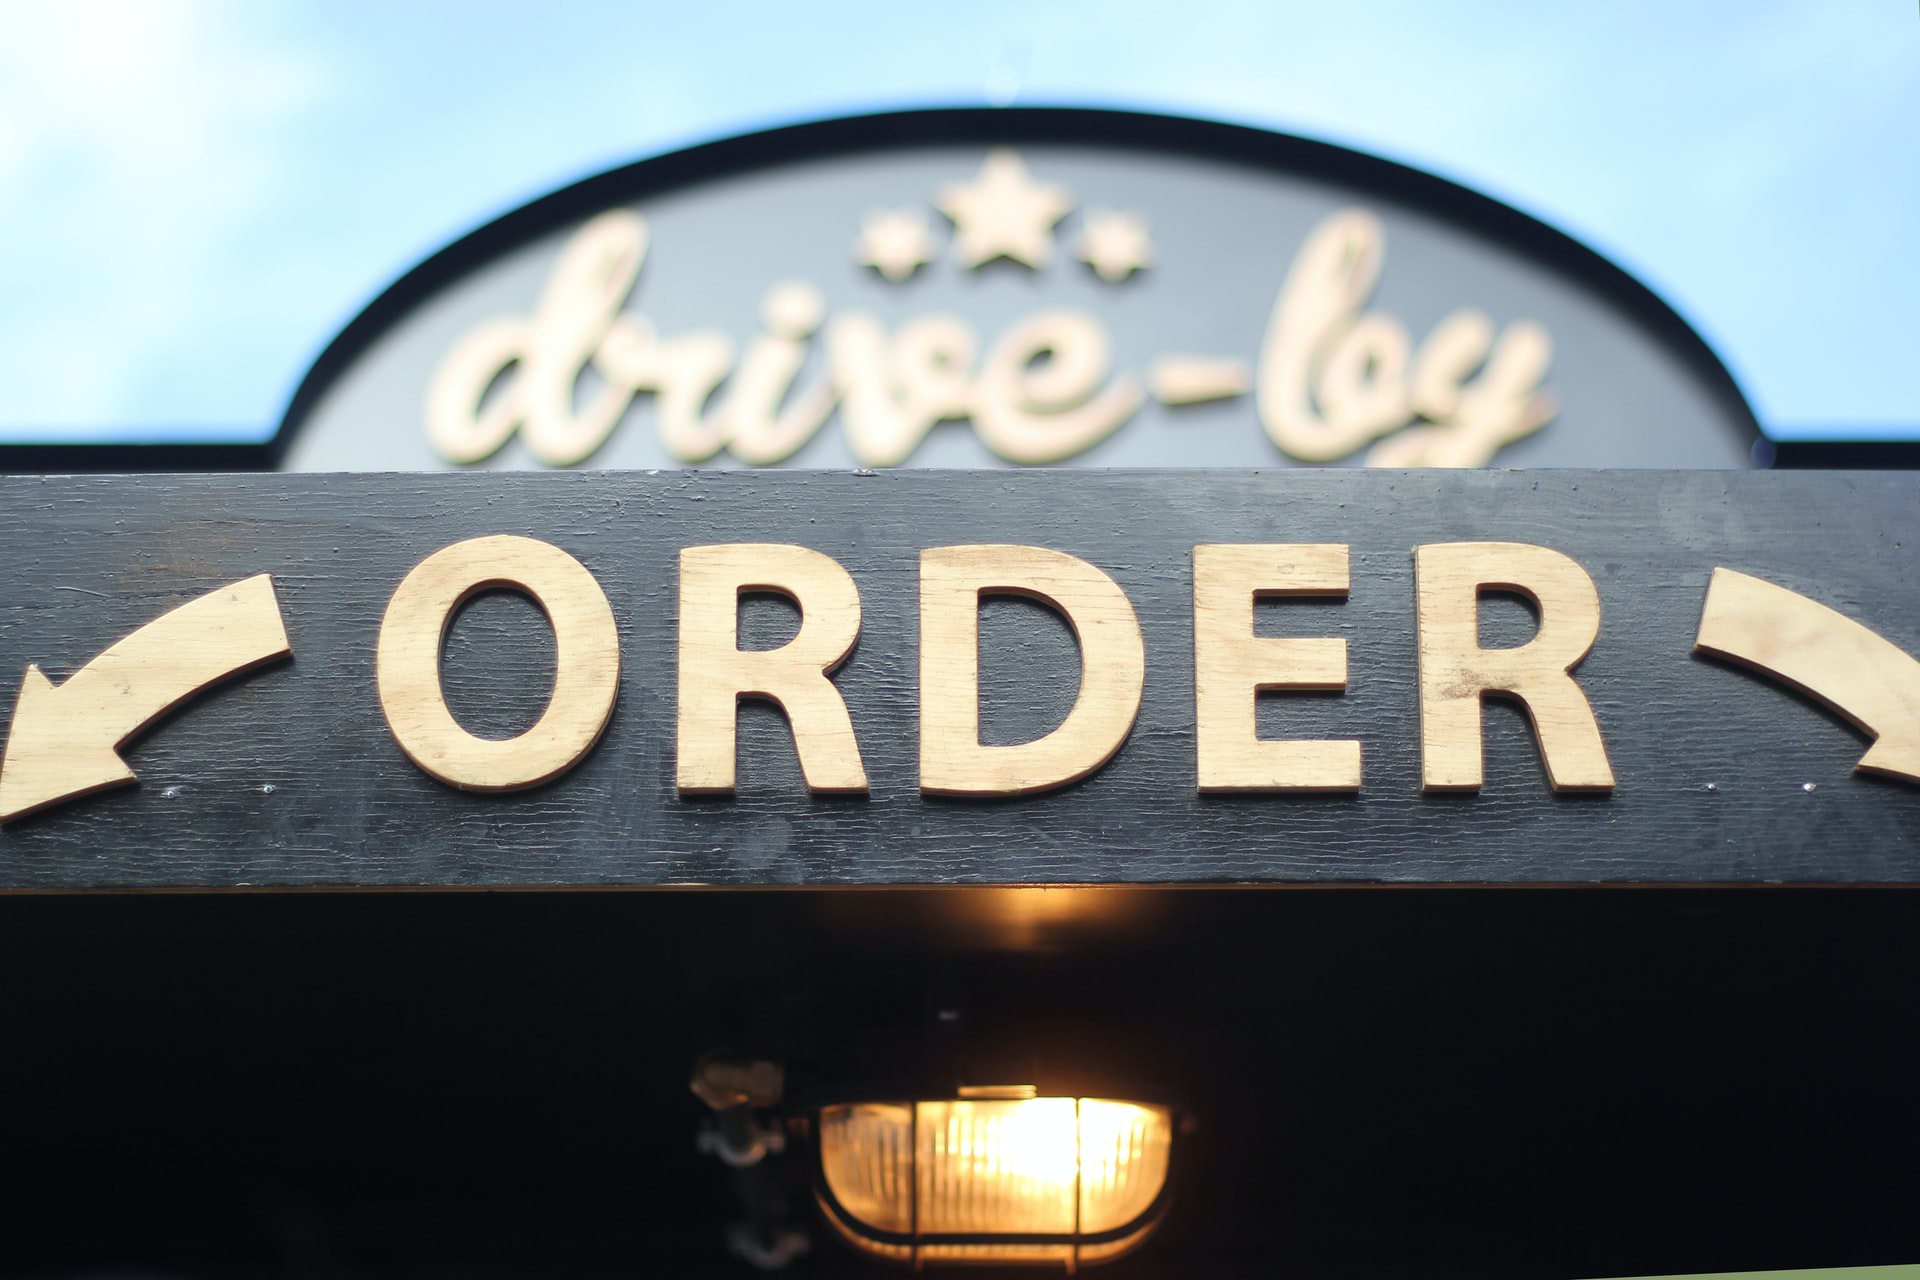 "drive by" and "order" building signs